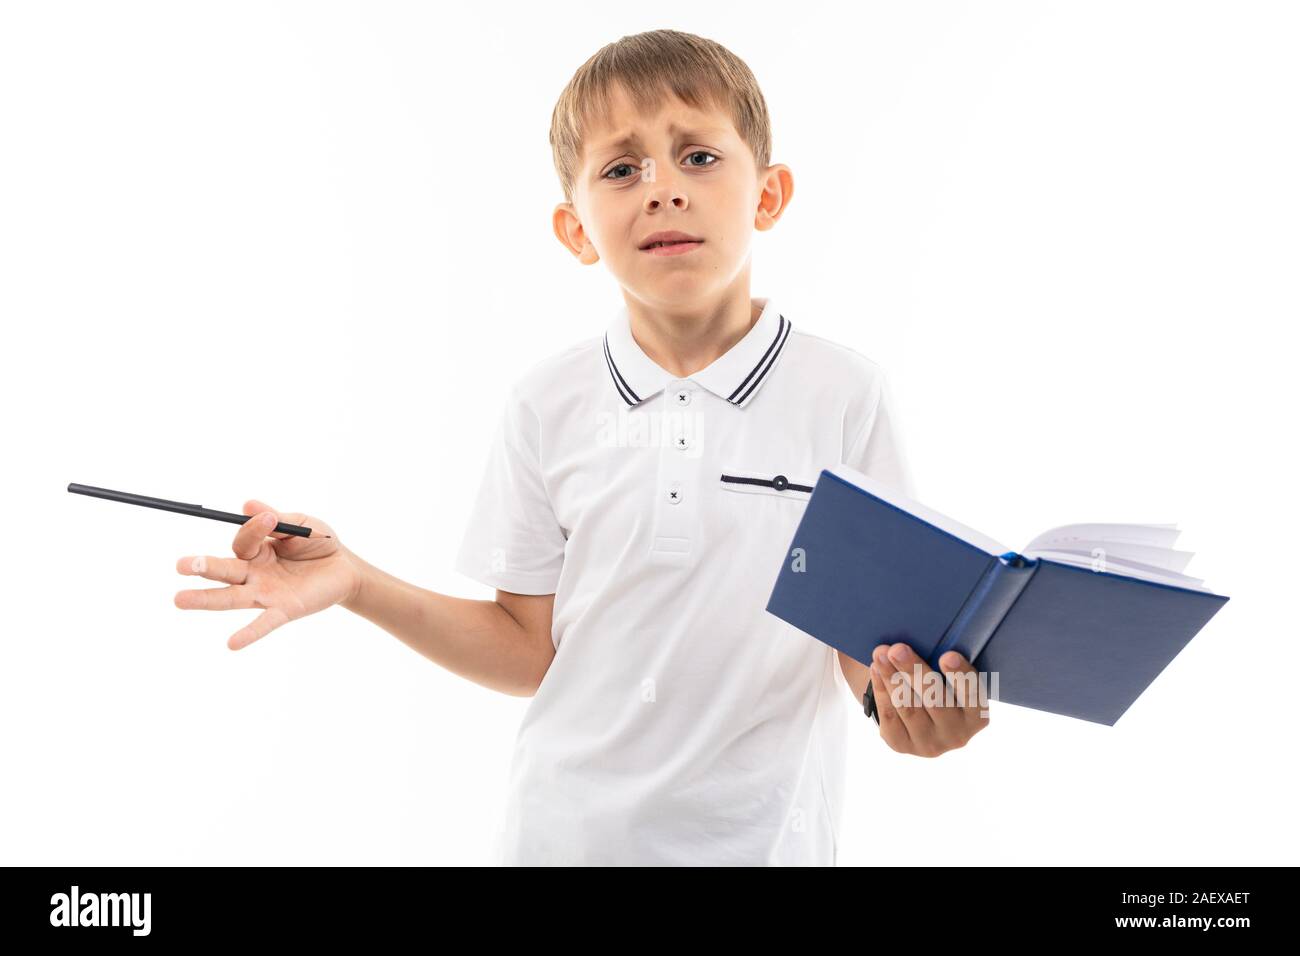 European boy reasoning with a book and pen in his hands on a white background Stock Photo